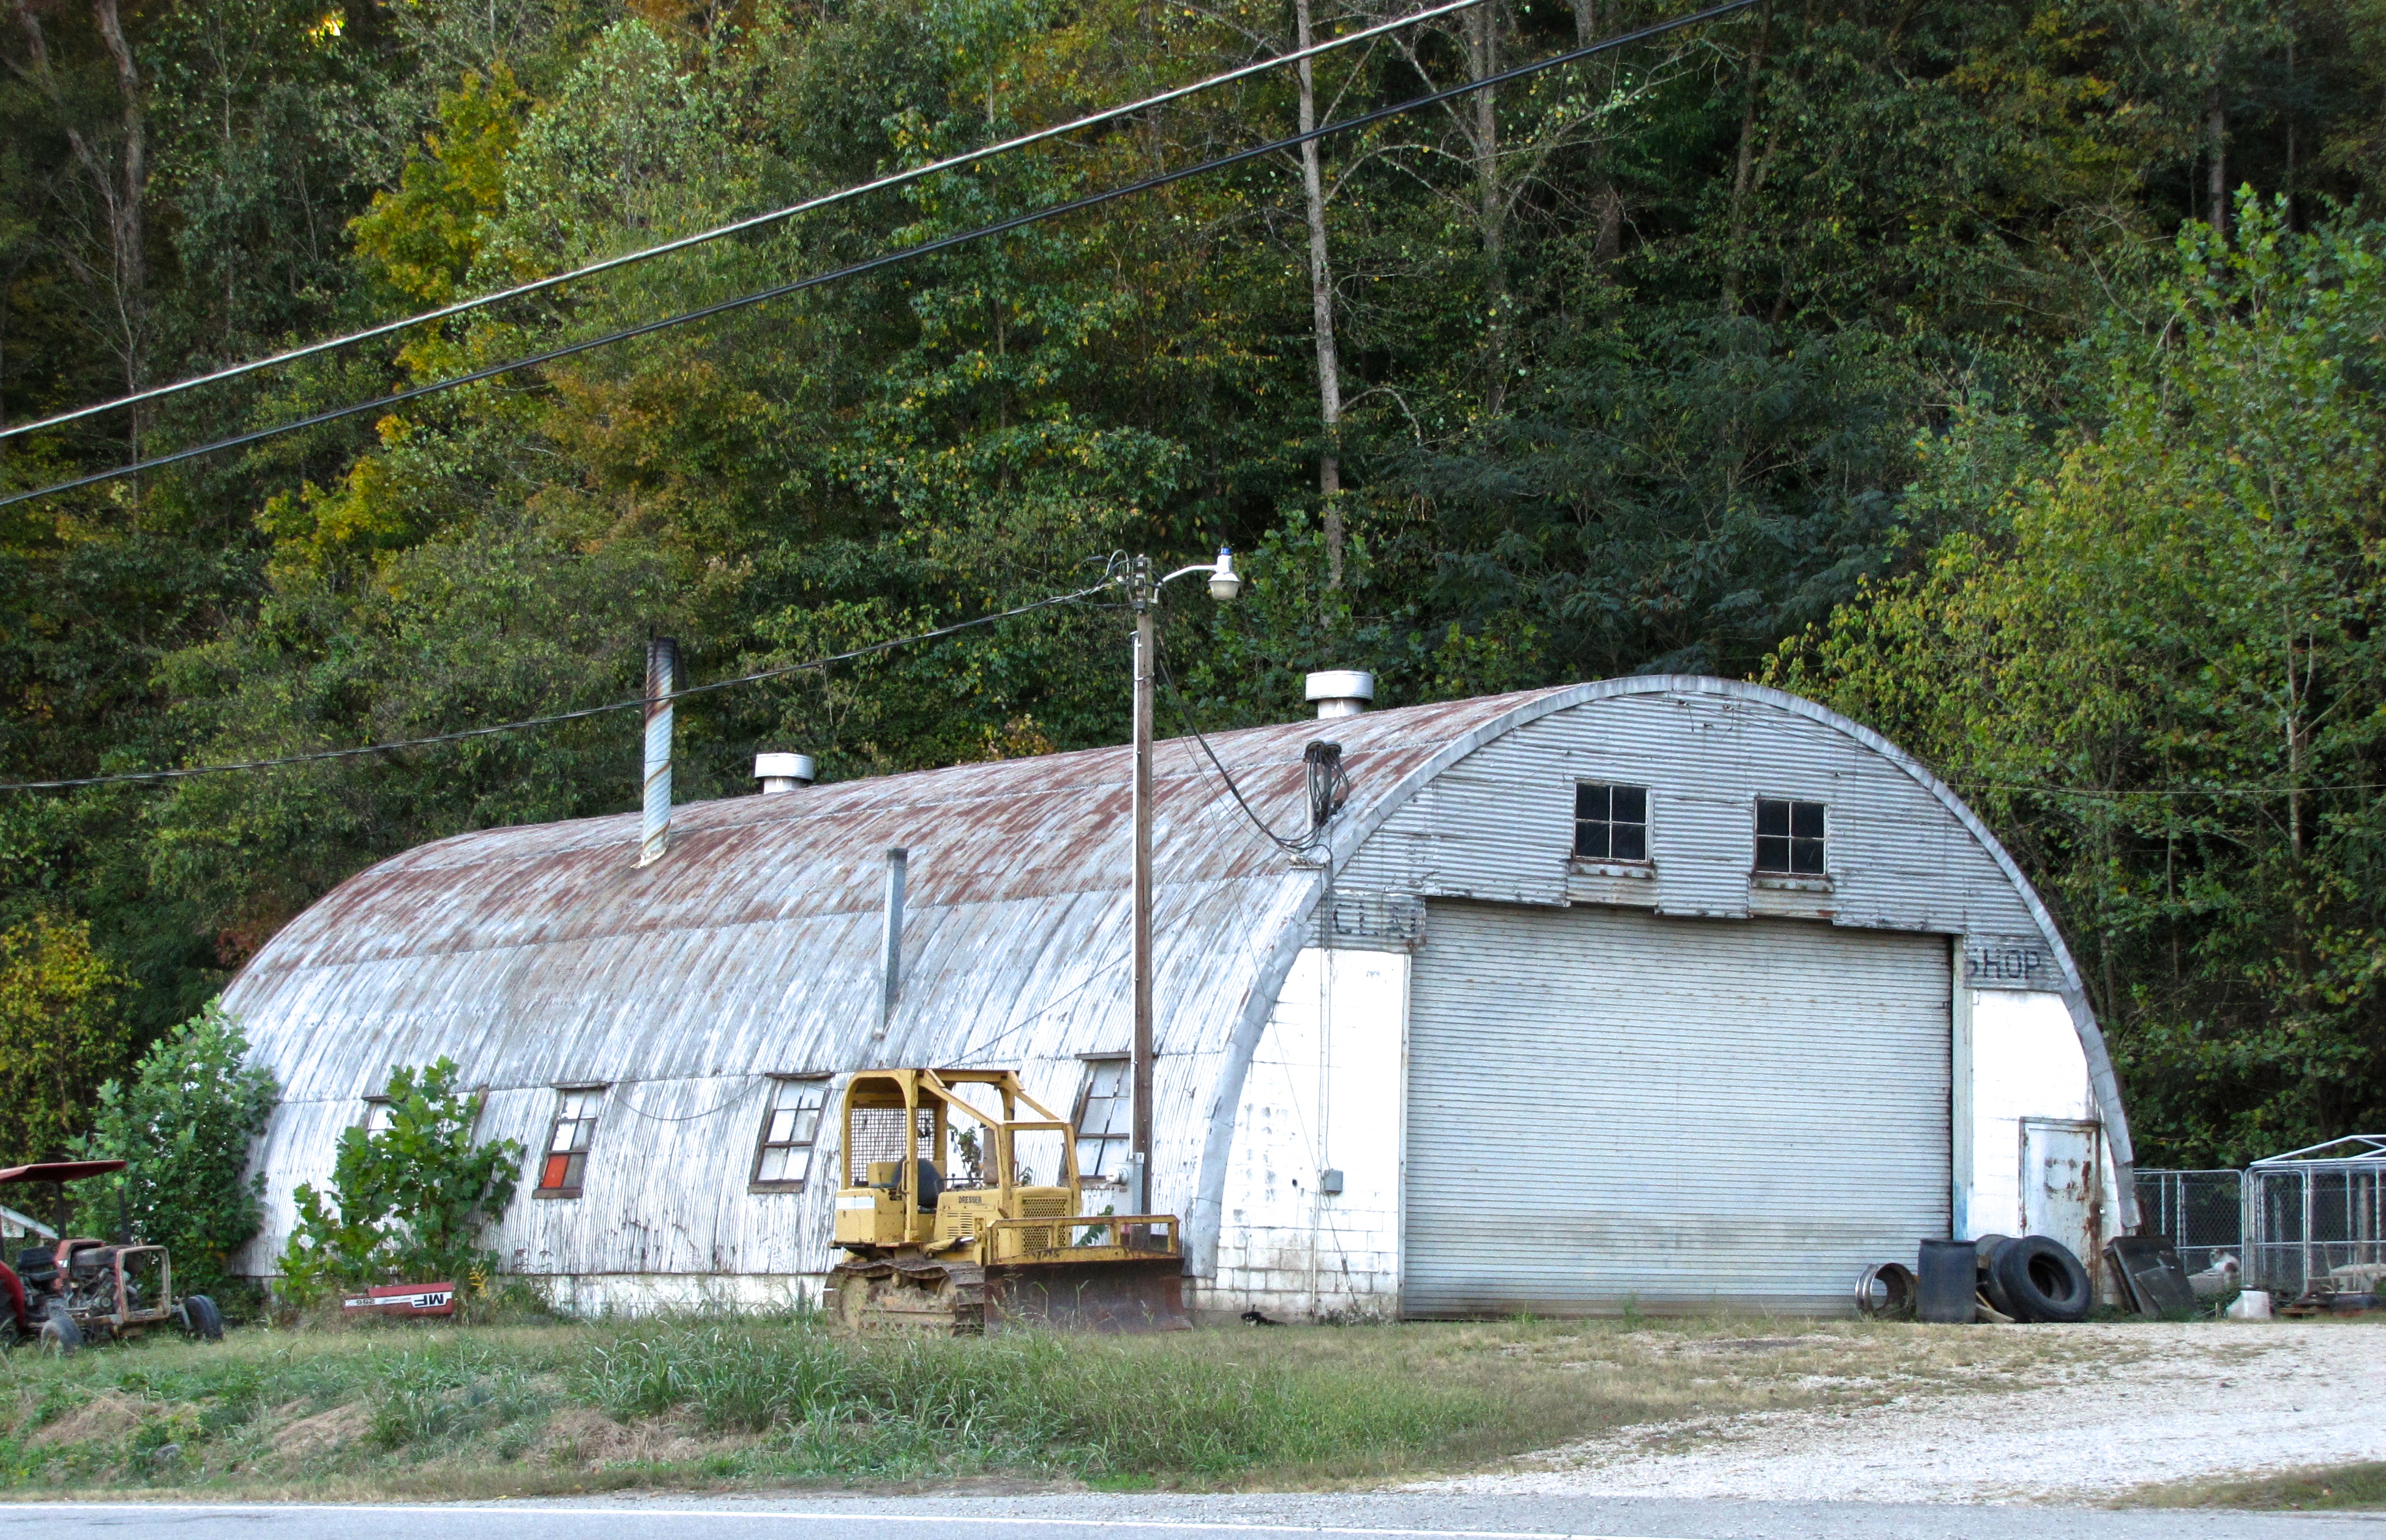 quonset hut in Sioux Center, IA